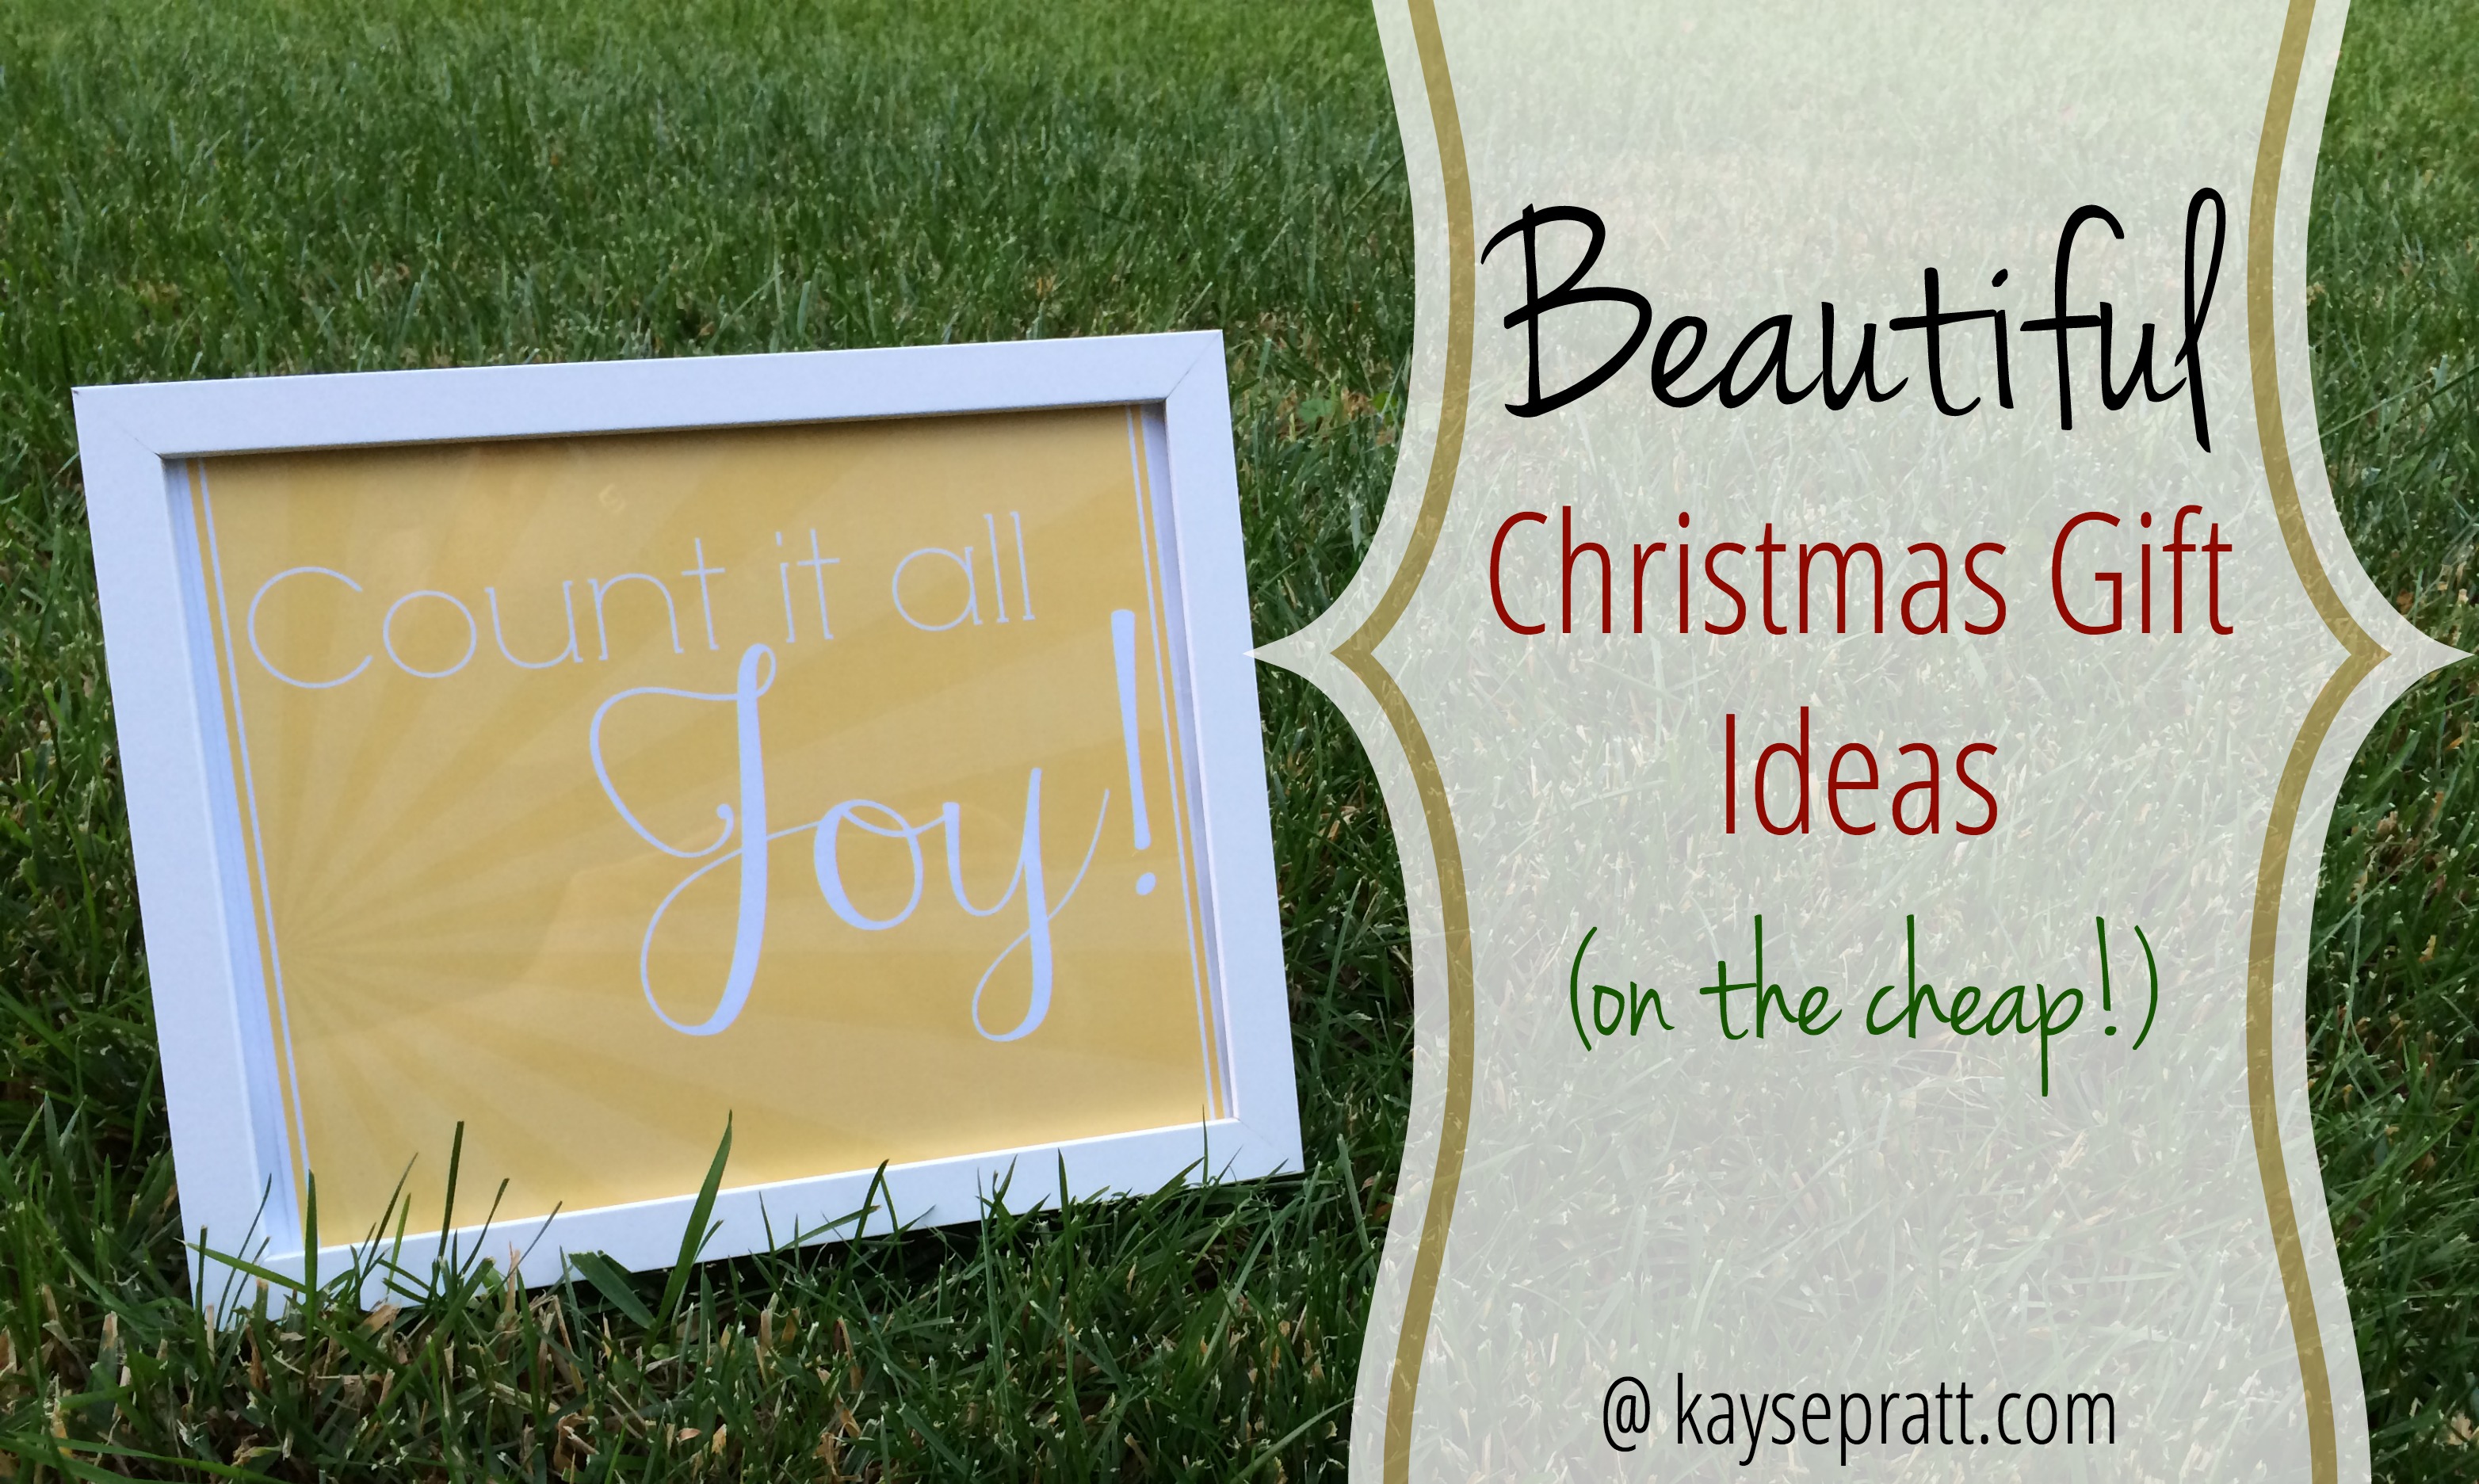 Beautiful Christmas Gift Ideas (on the cheap!)